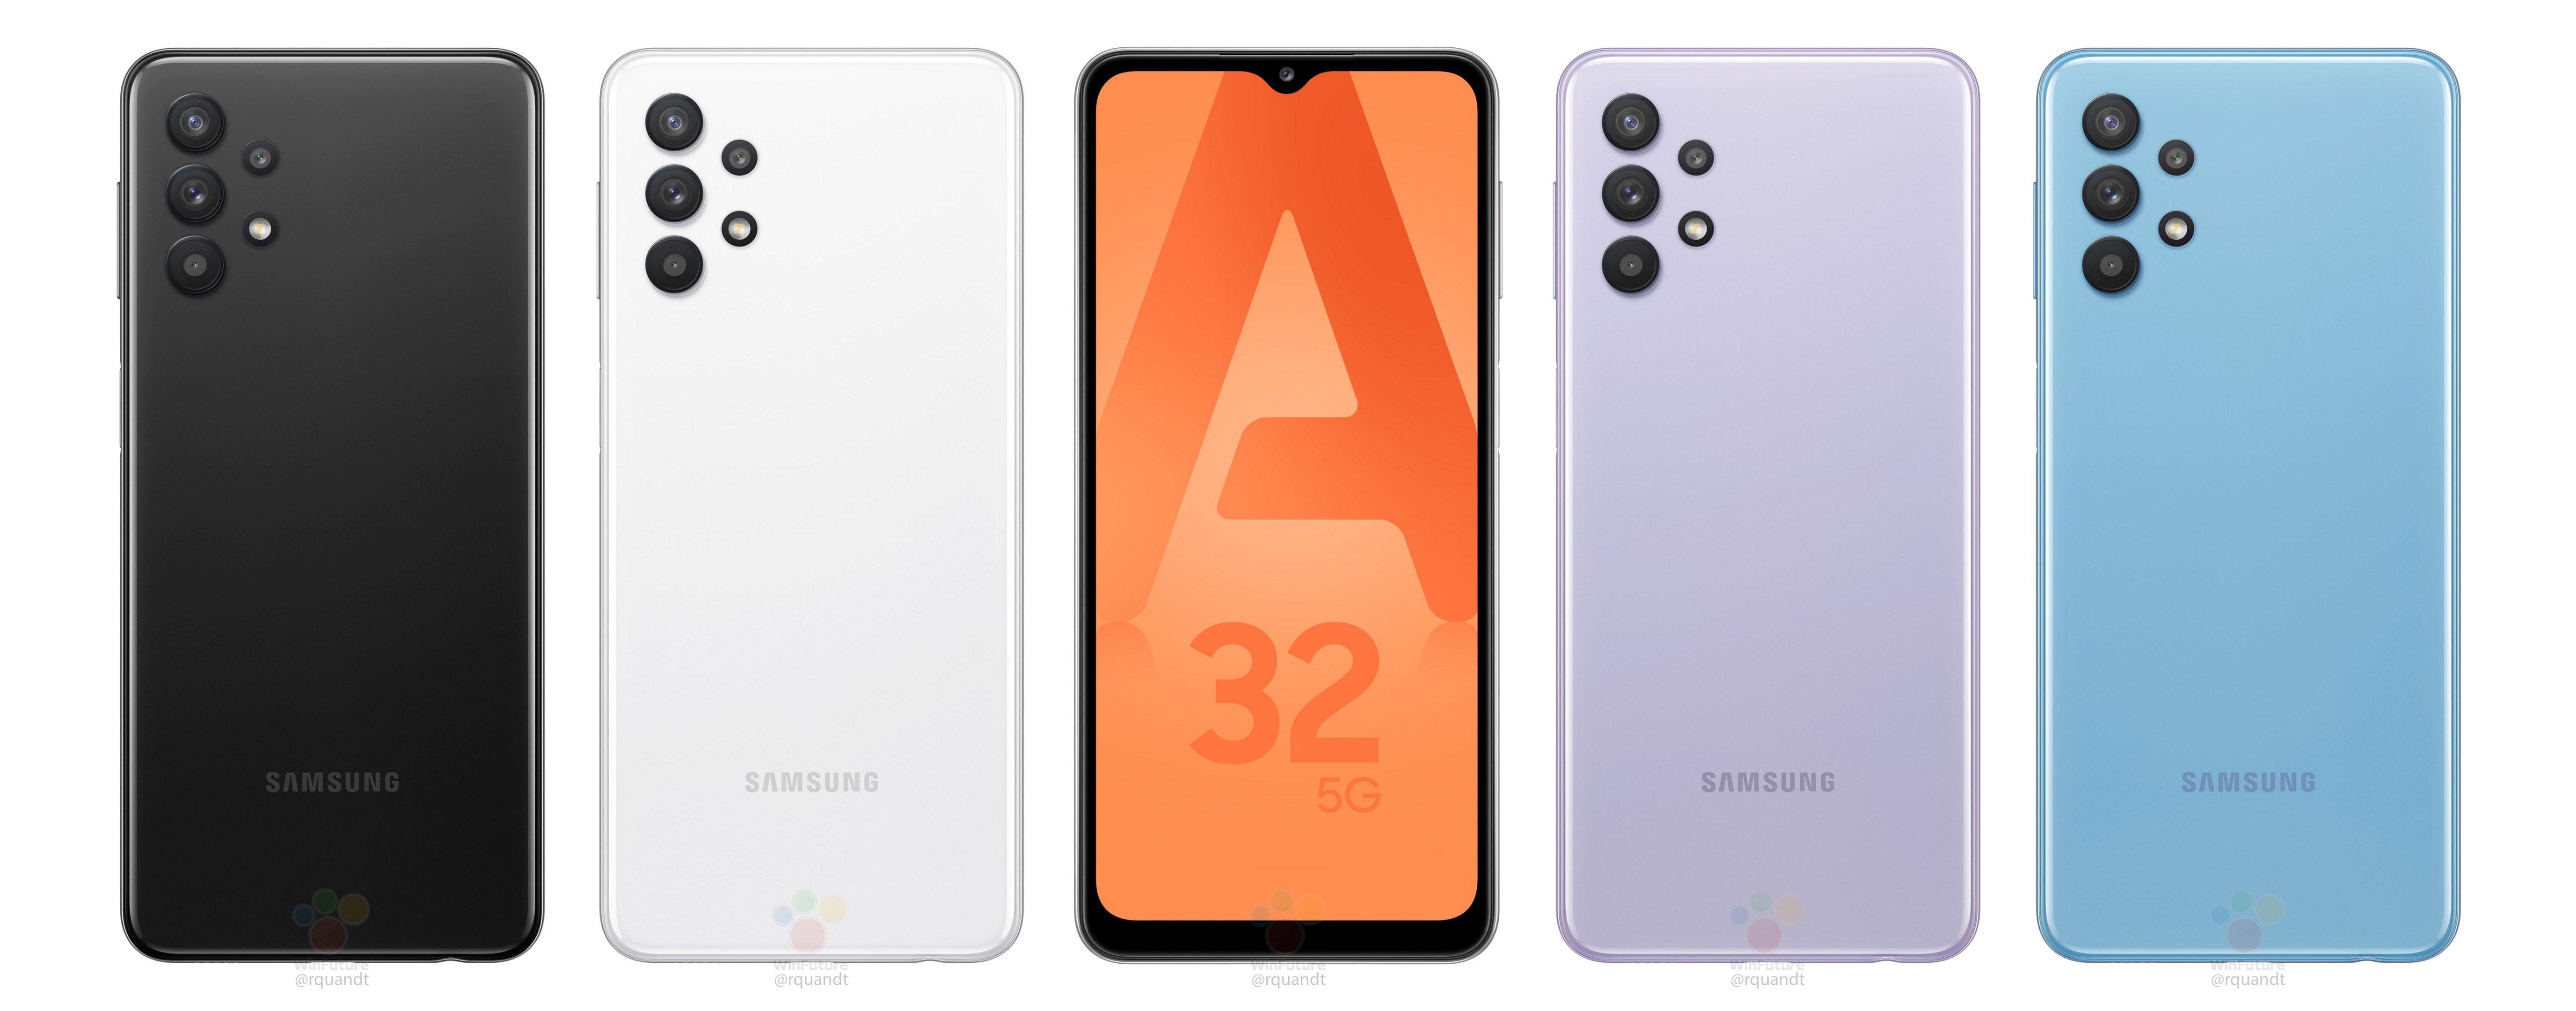 Samsung Galaxy A32 5G official renders leaked to reveal impressive rear design - Gizmochina